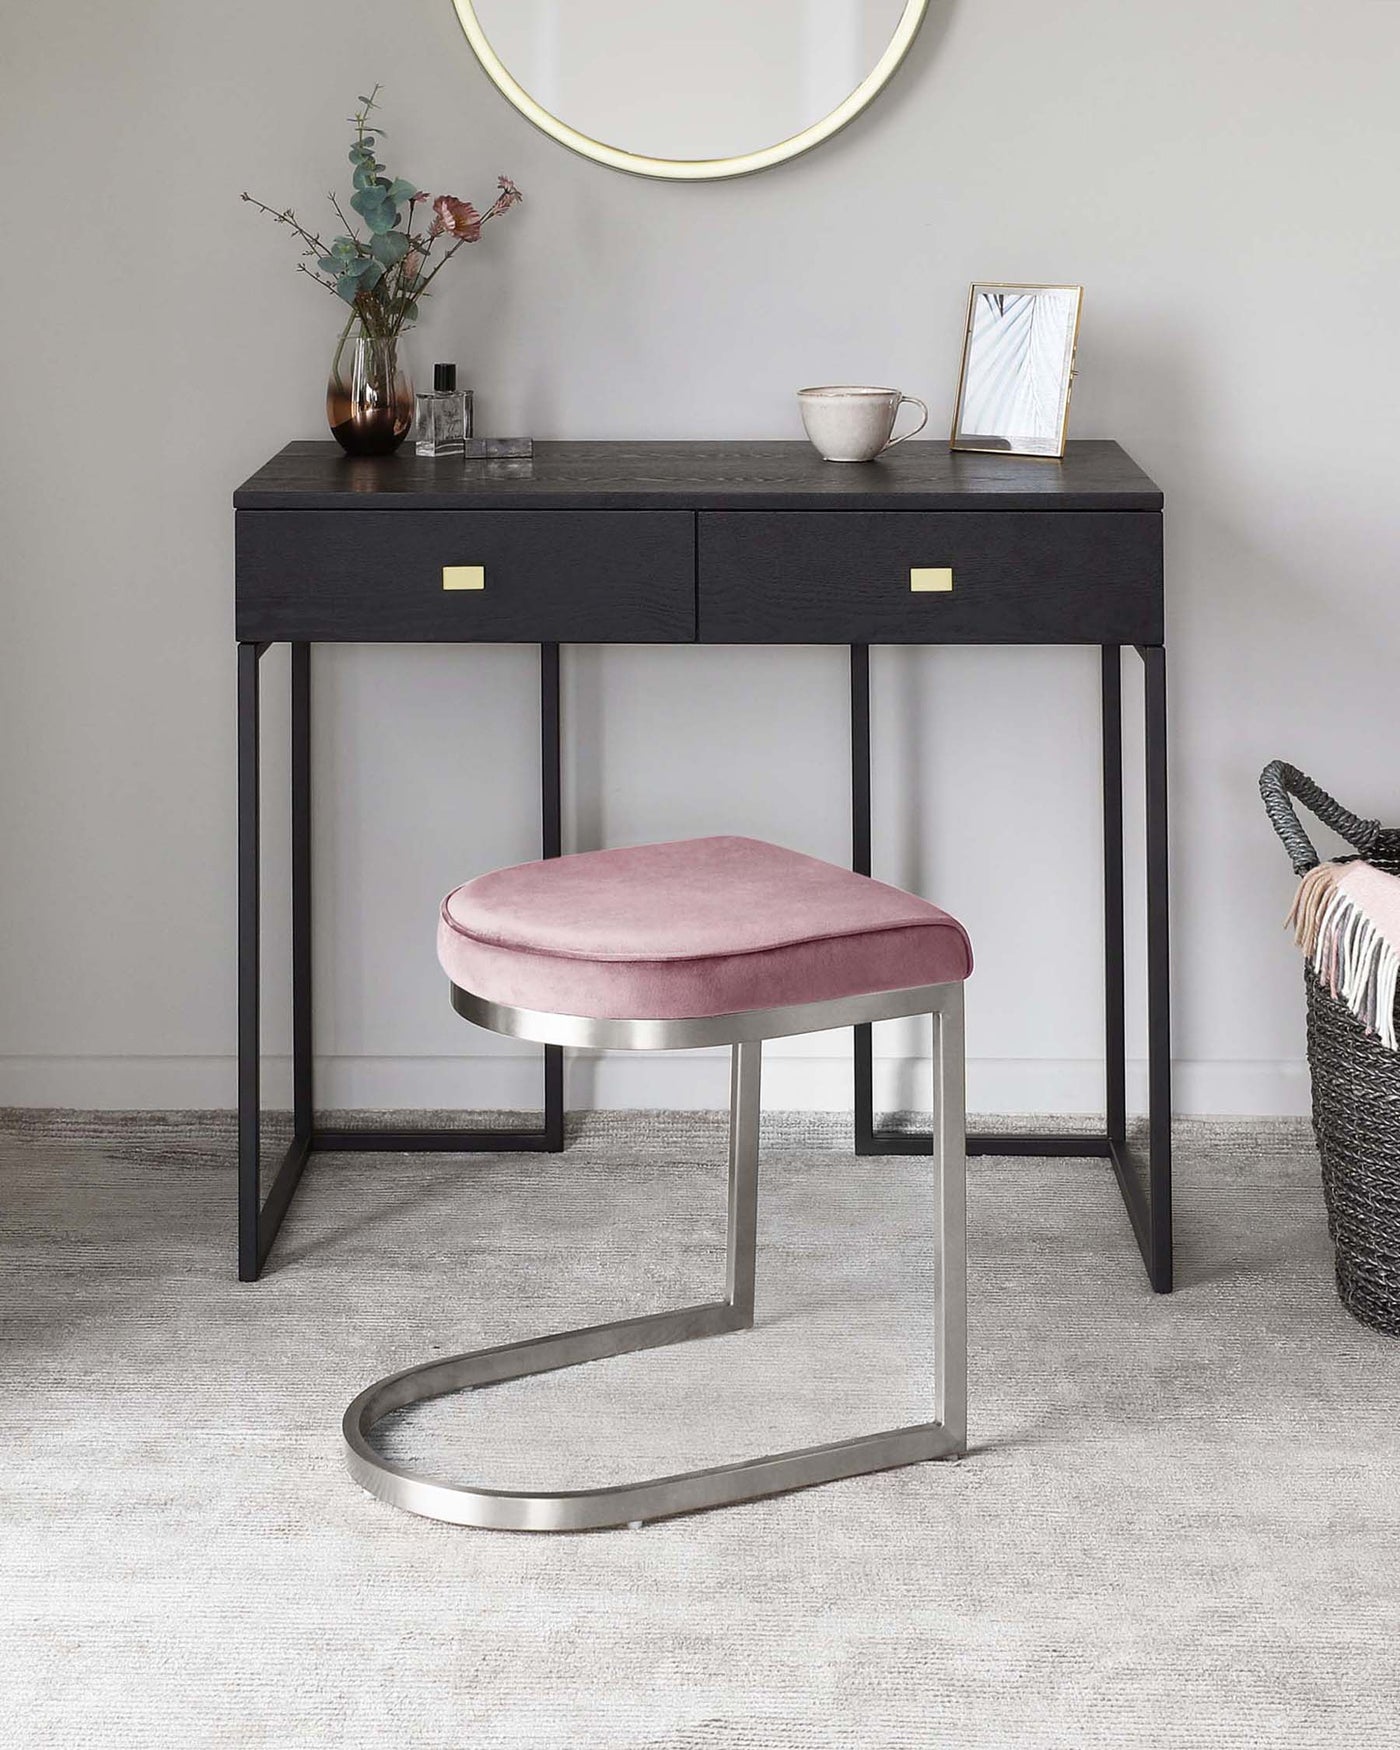 Black wood console table with slender metal legs and two drawers featuring brass handles, paired with a round mirror above and a modern stool with a velvety pink cushion and silver metal base.